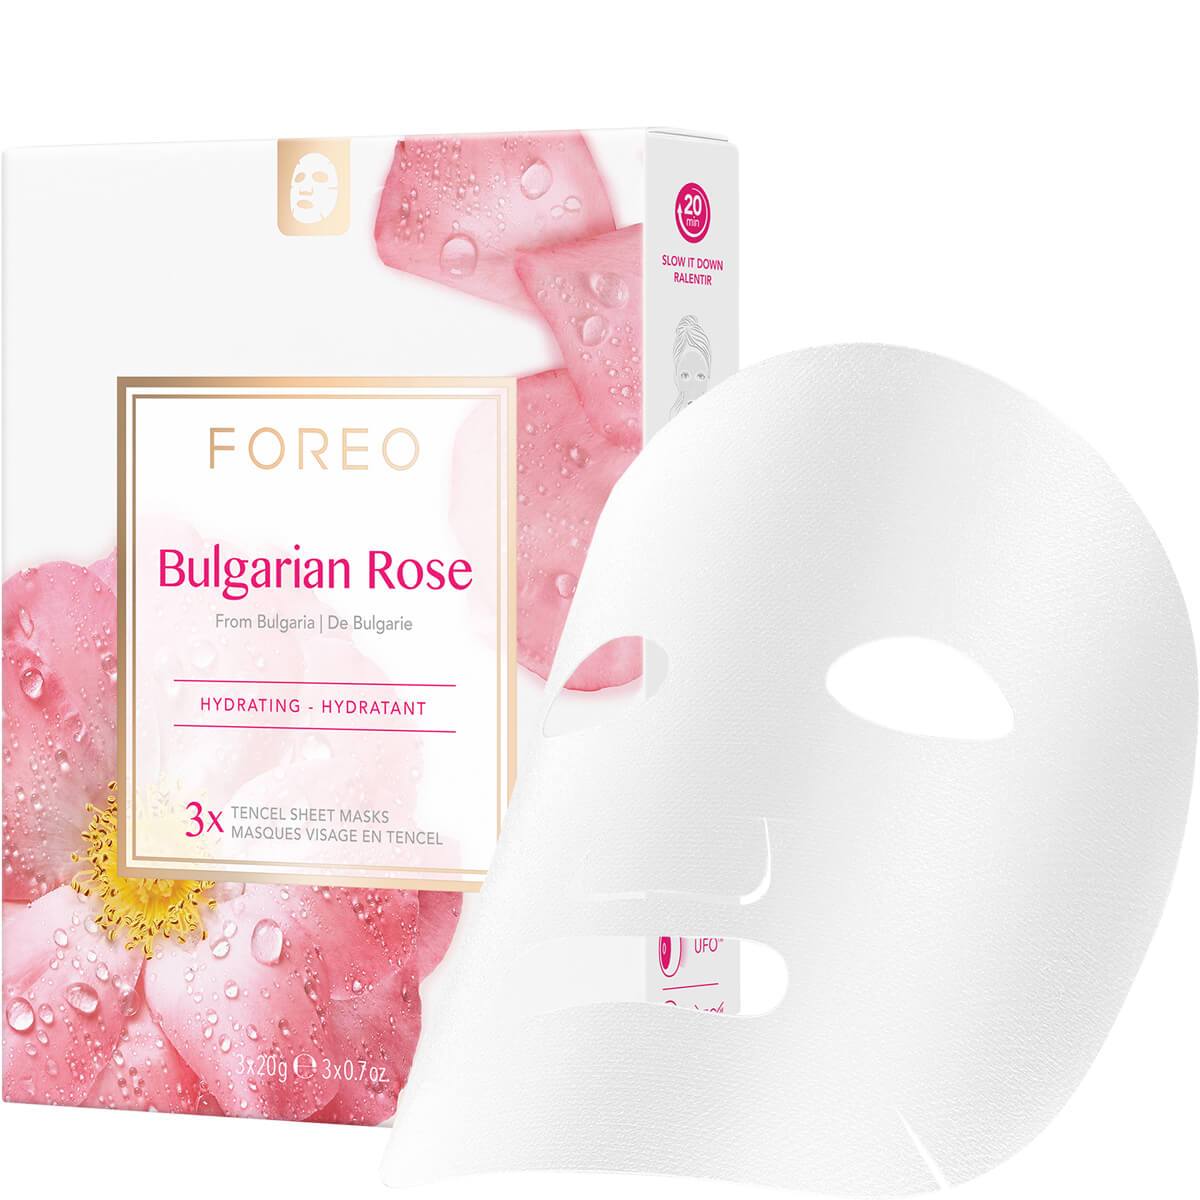 Bulgarian | Rose US Face FOREO Mask Moisture-Boosting Sheet CurrentBody